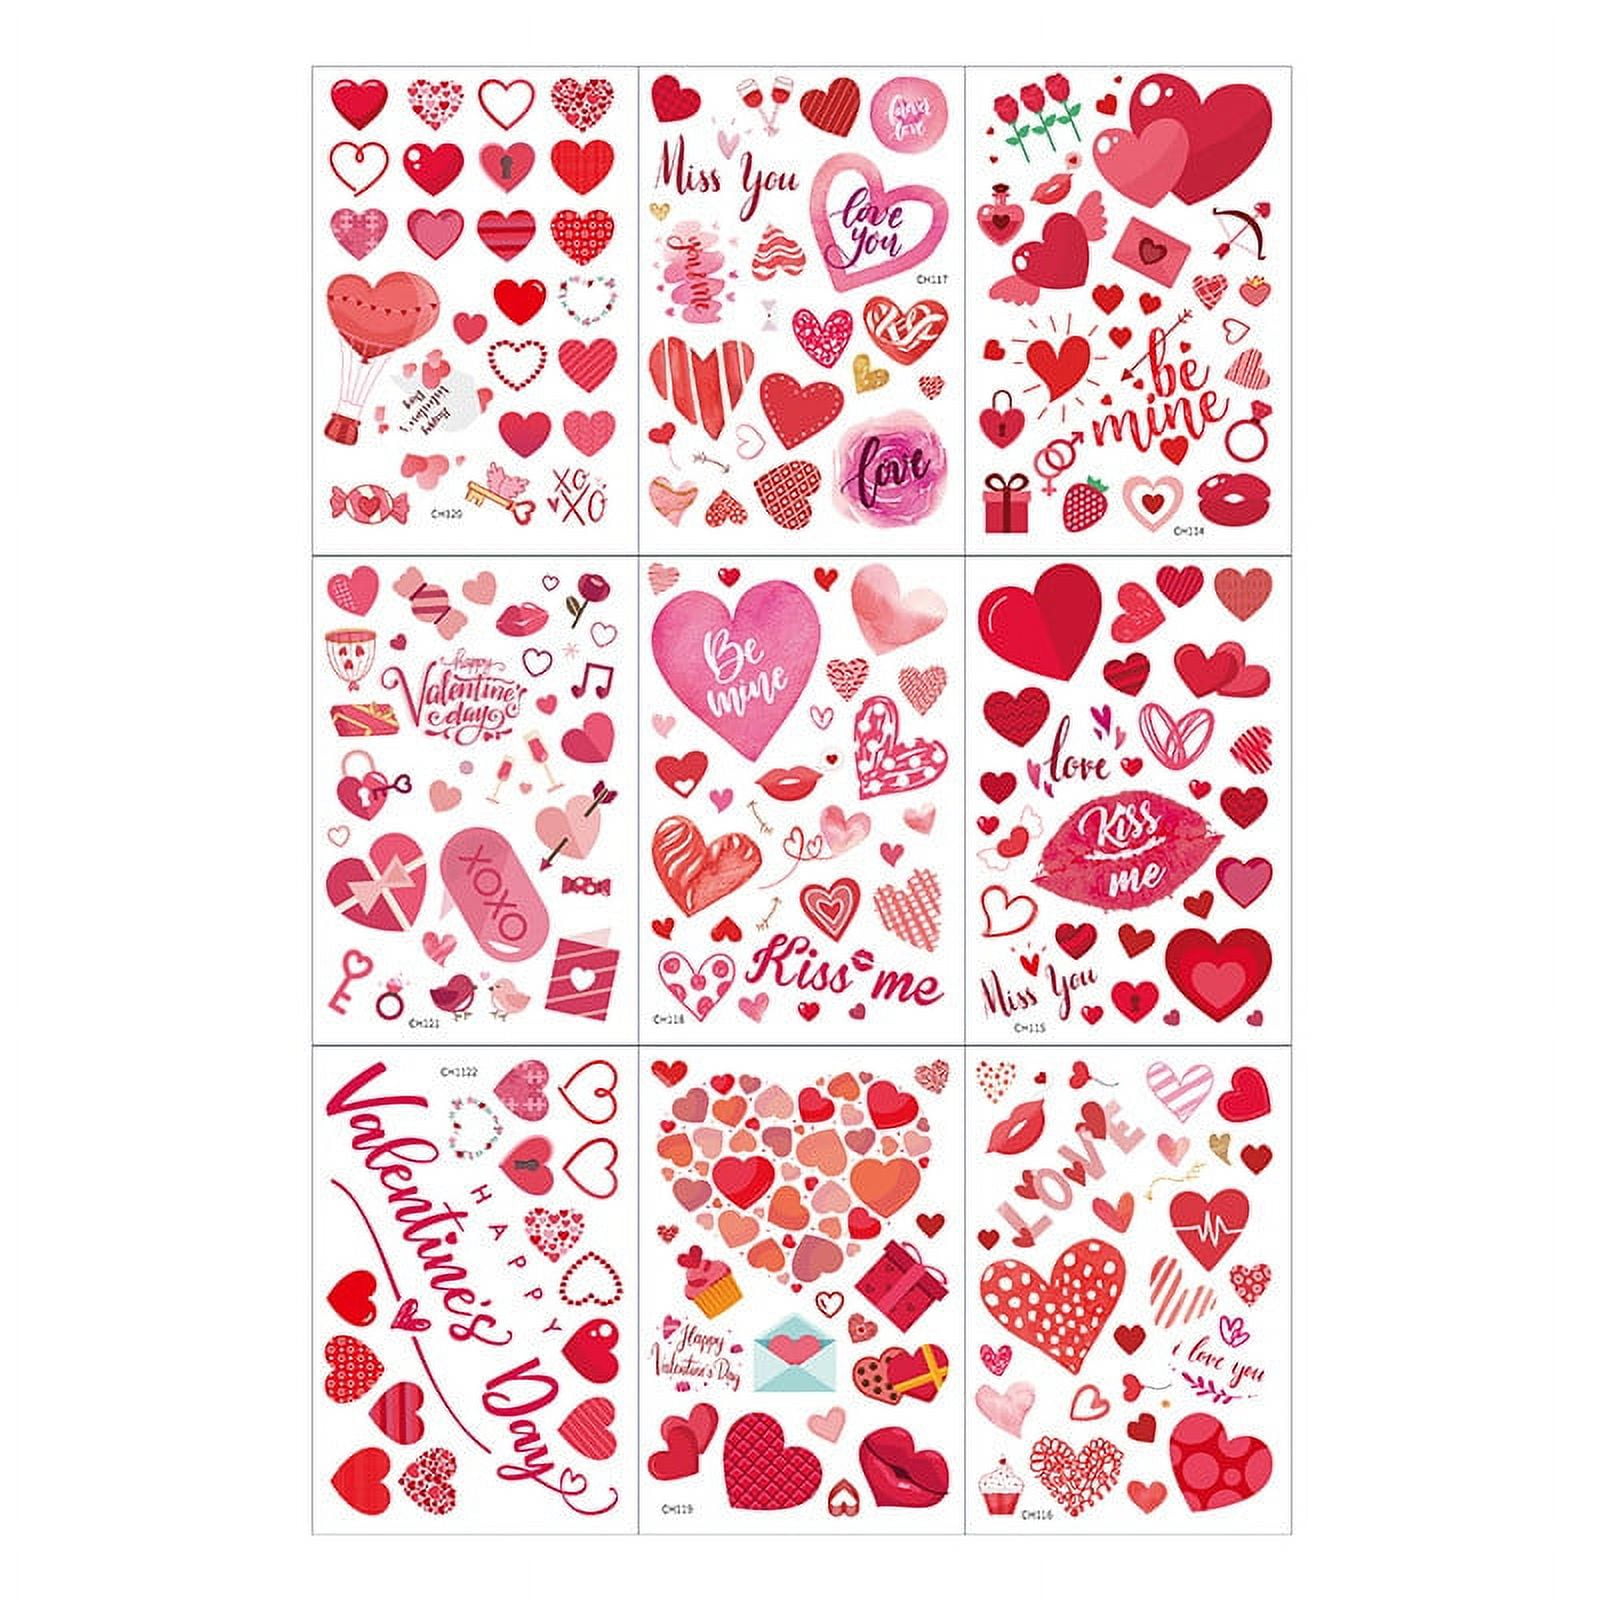  Partywind 2000 PCS Valentines Day Heart Stickers, Self